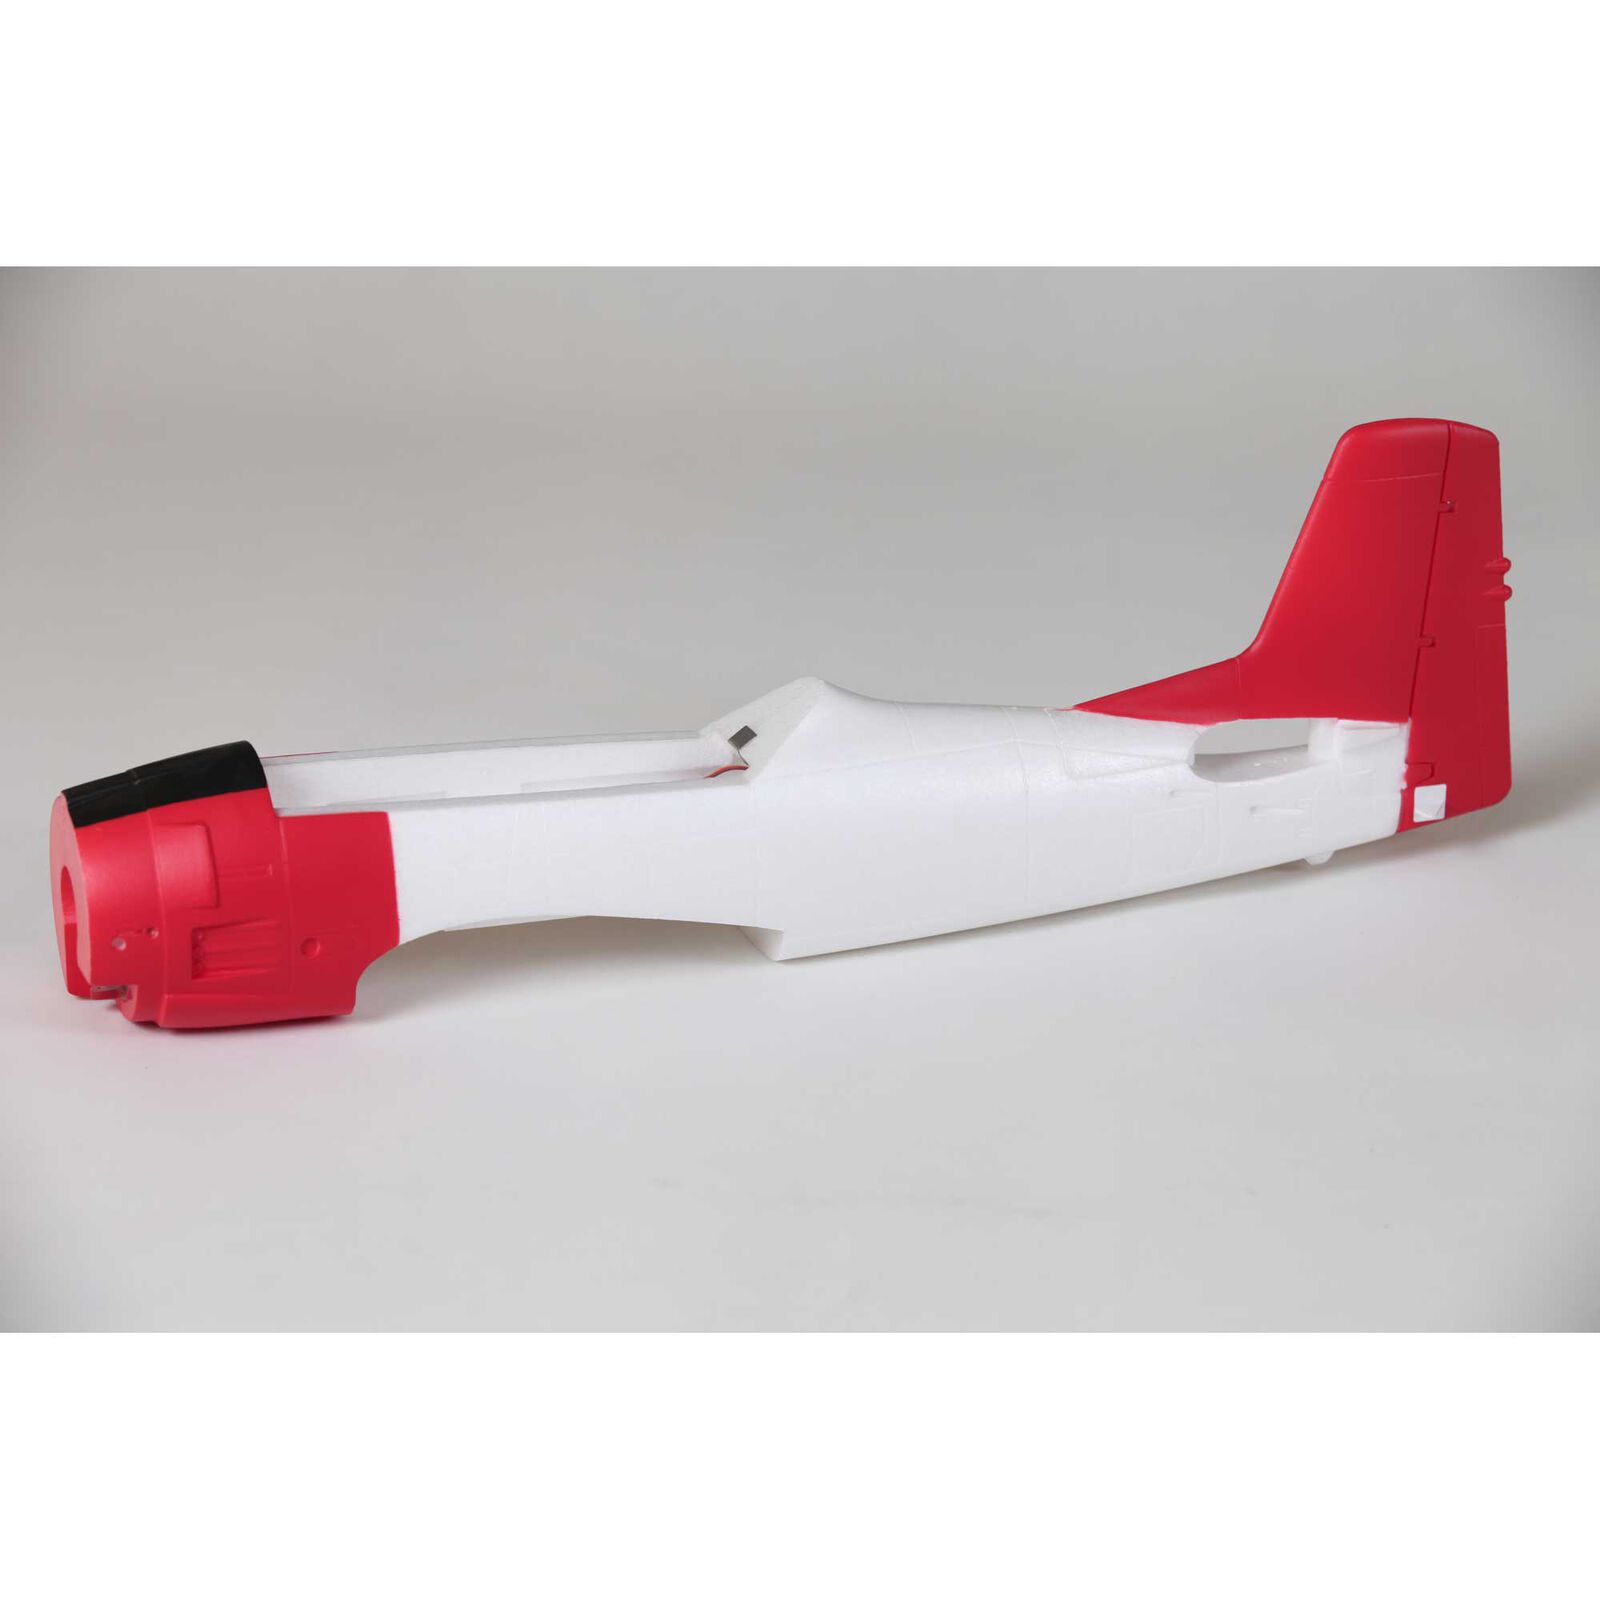 Fuselage, Red: All T-28 800mm